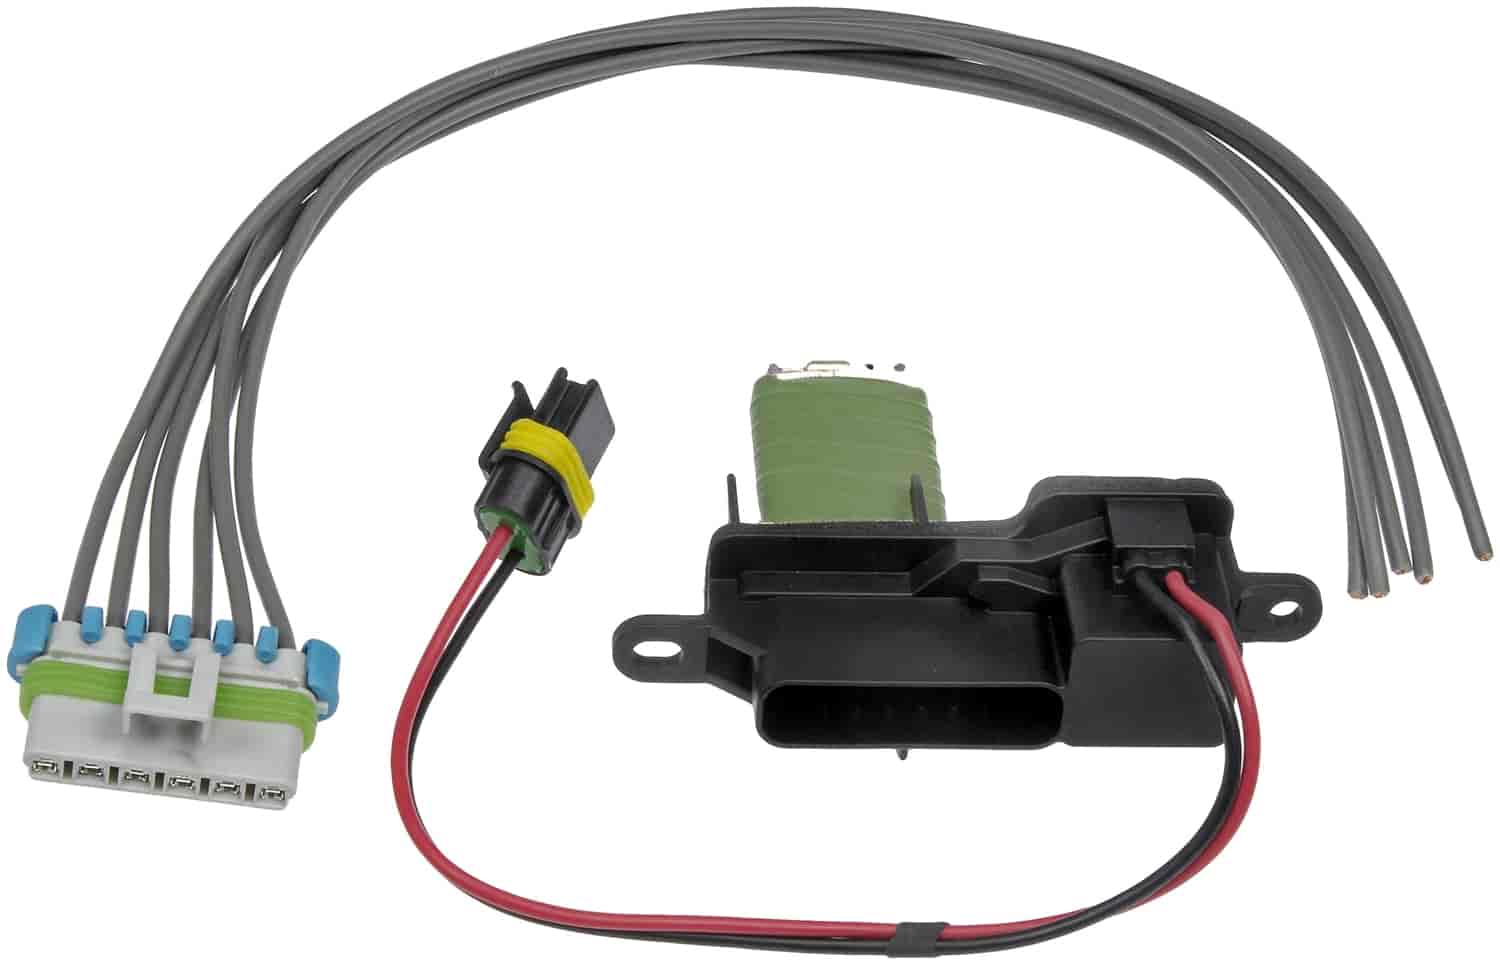 Blower Motor Resistor Kit with Harness